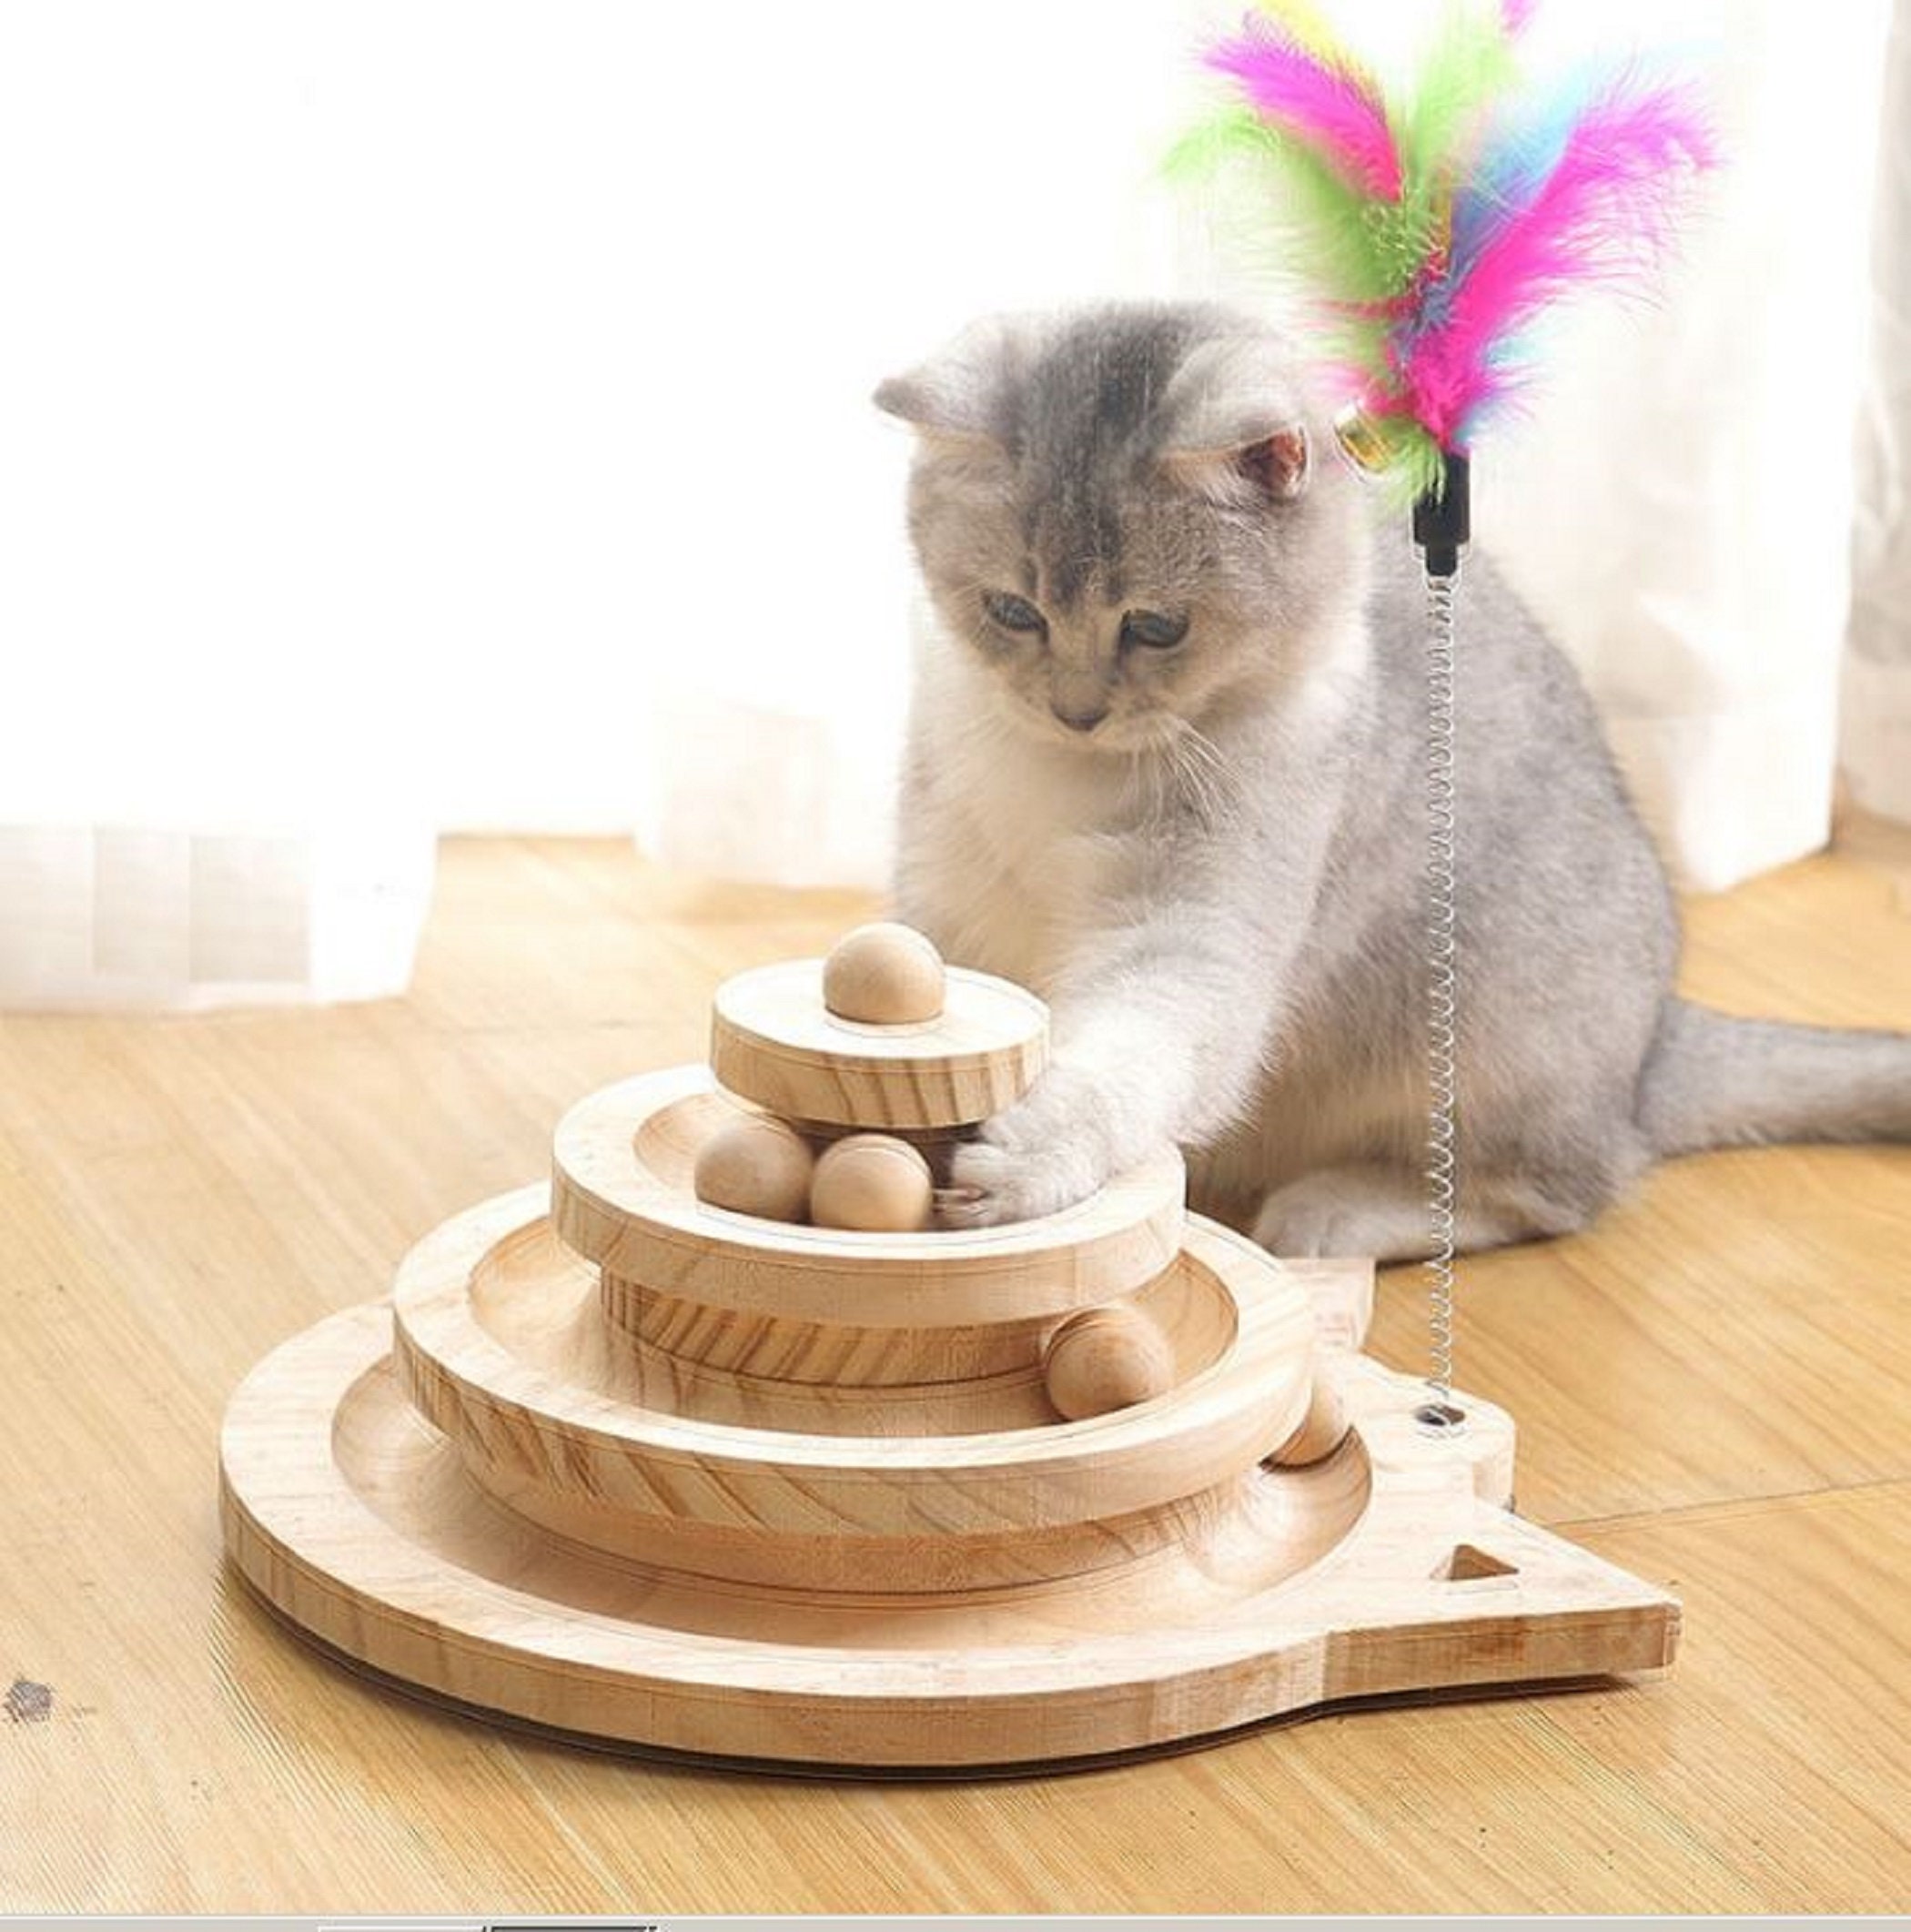 Cat Whack Toy Cat Scratch Pad Bed Cardboard Box Protect Carpets Wear  Resistant Pet Teaser Toy Wooden Puzzle Toys Enrichment Toy 